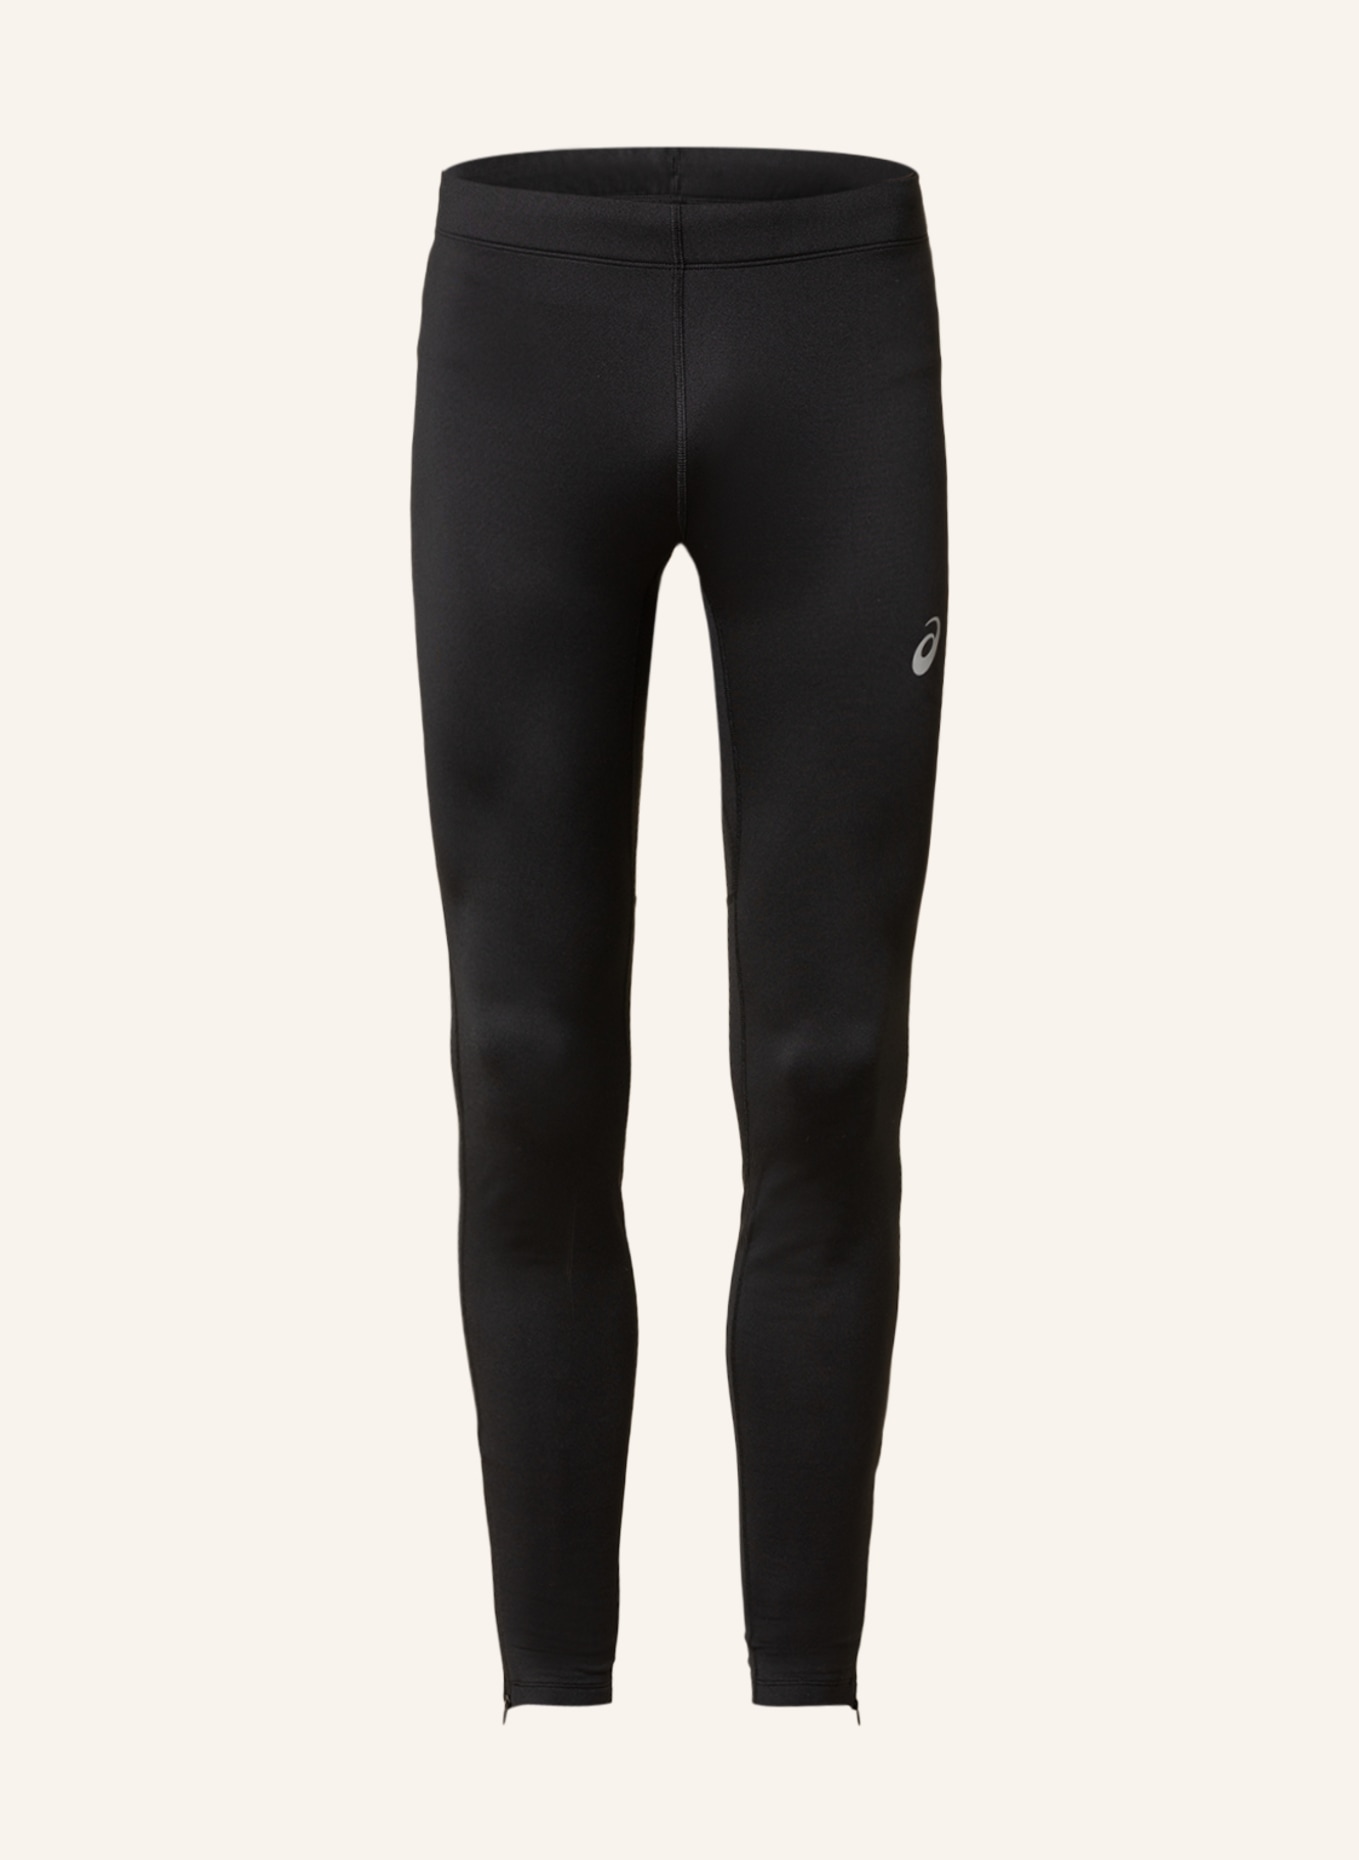 Running trousers in CORE ASICS TIGHT black WINTER